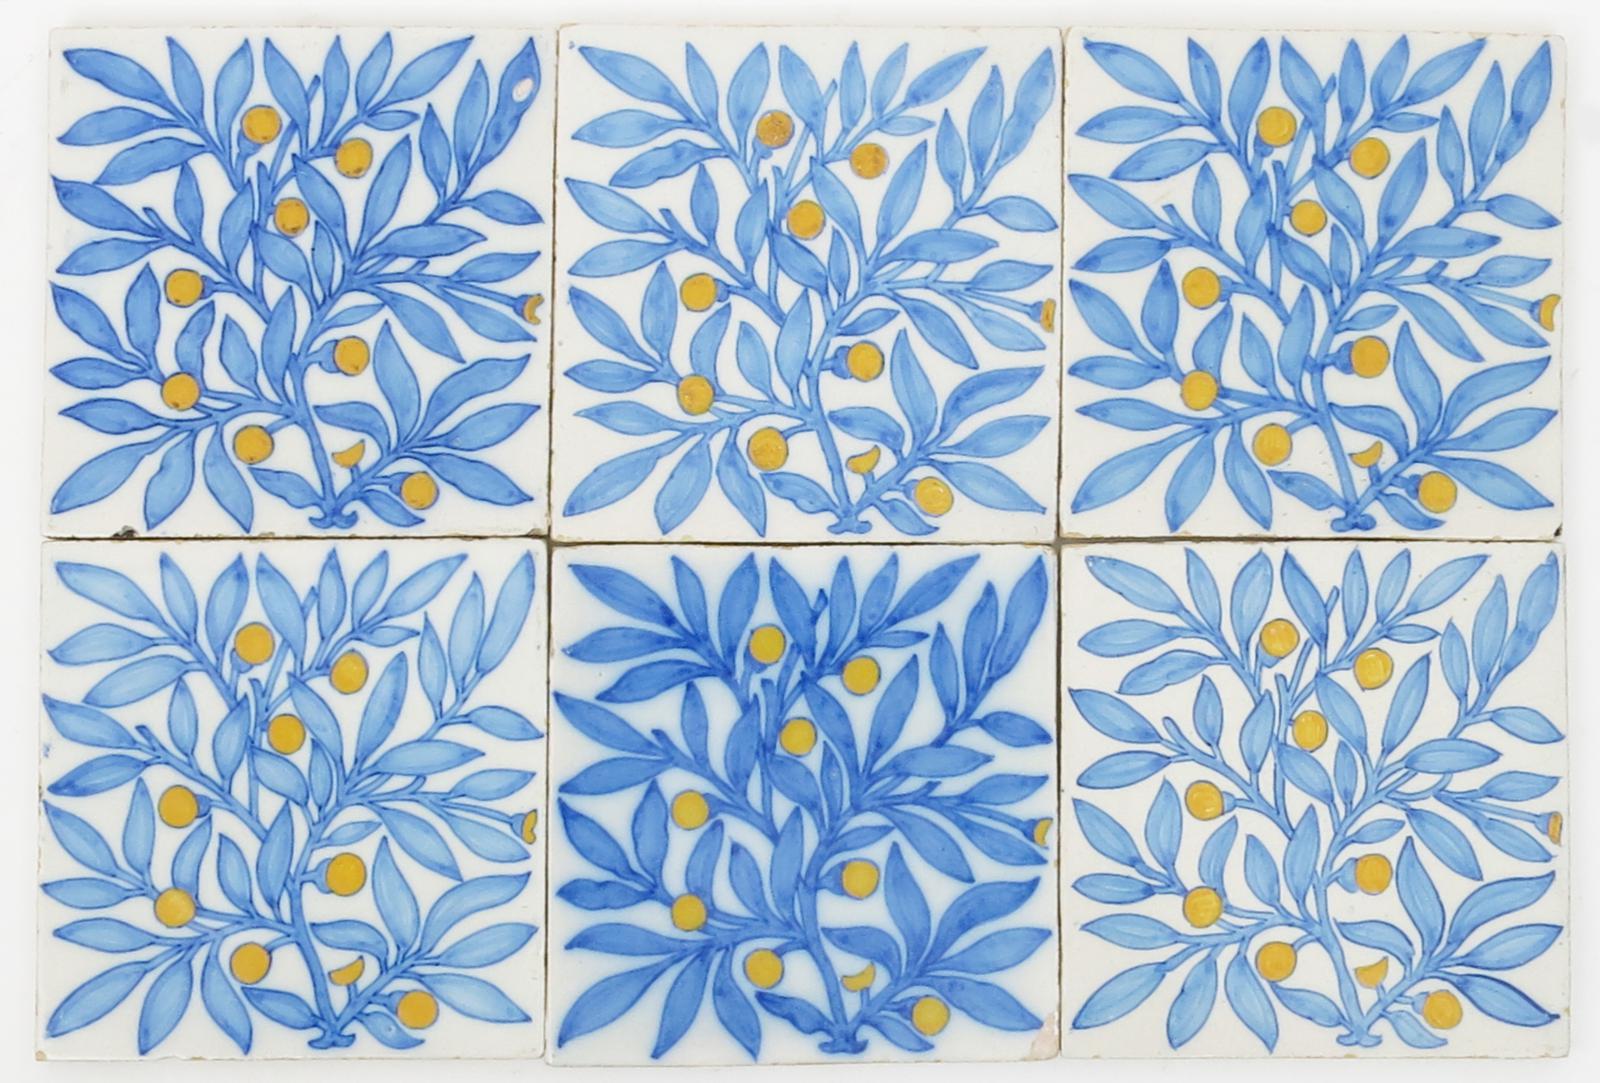 Eight tin-glaze tiles in the manner of Morris & Co, decorated with a bough of berried foliage in